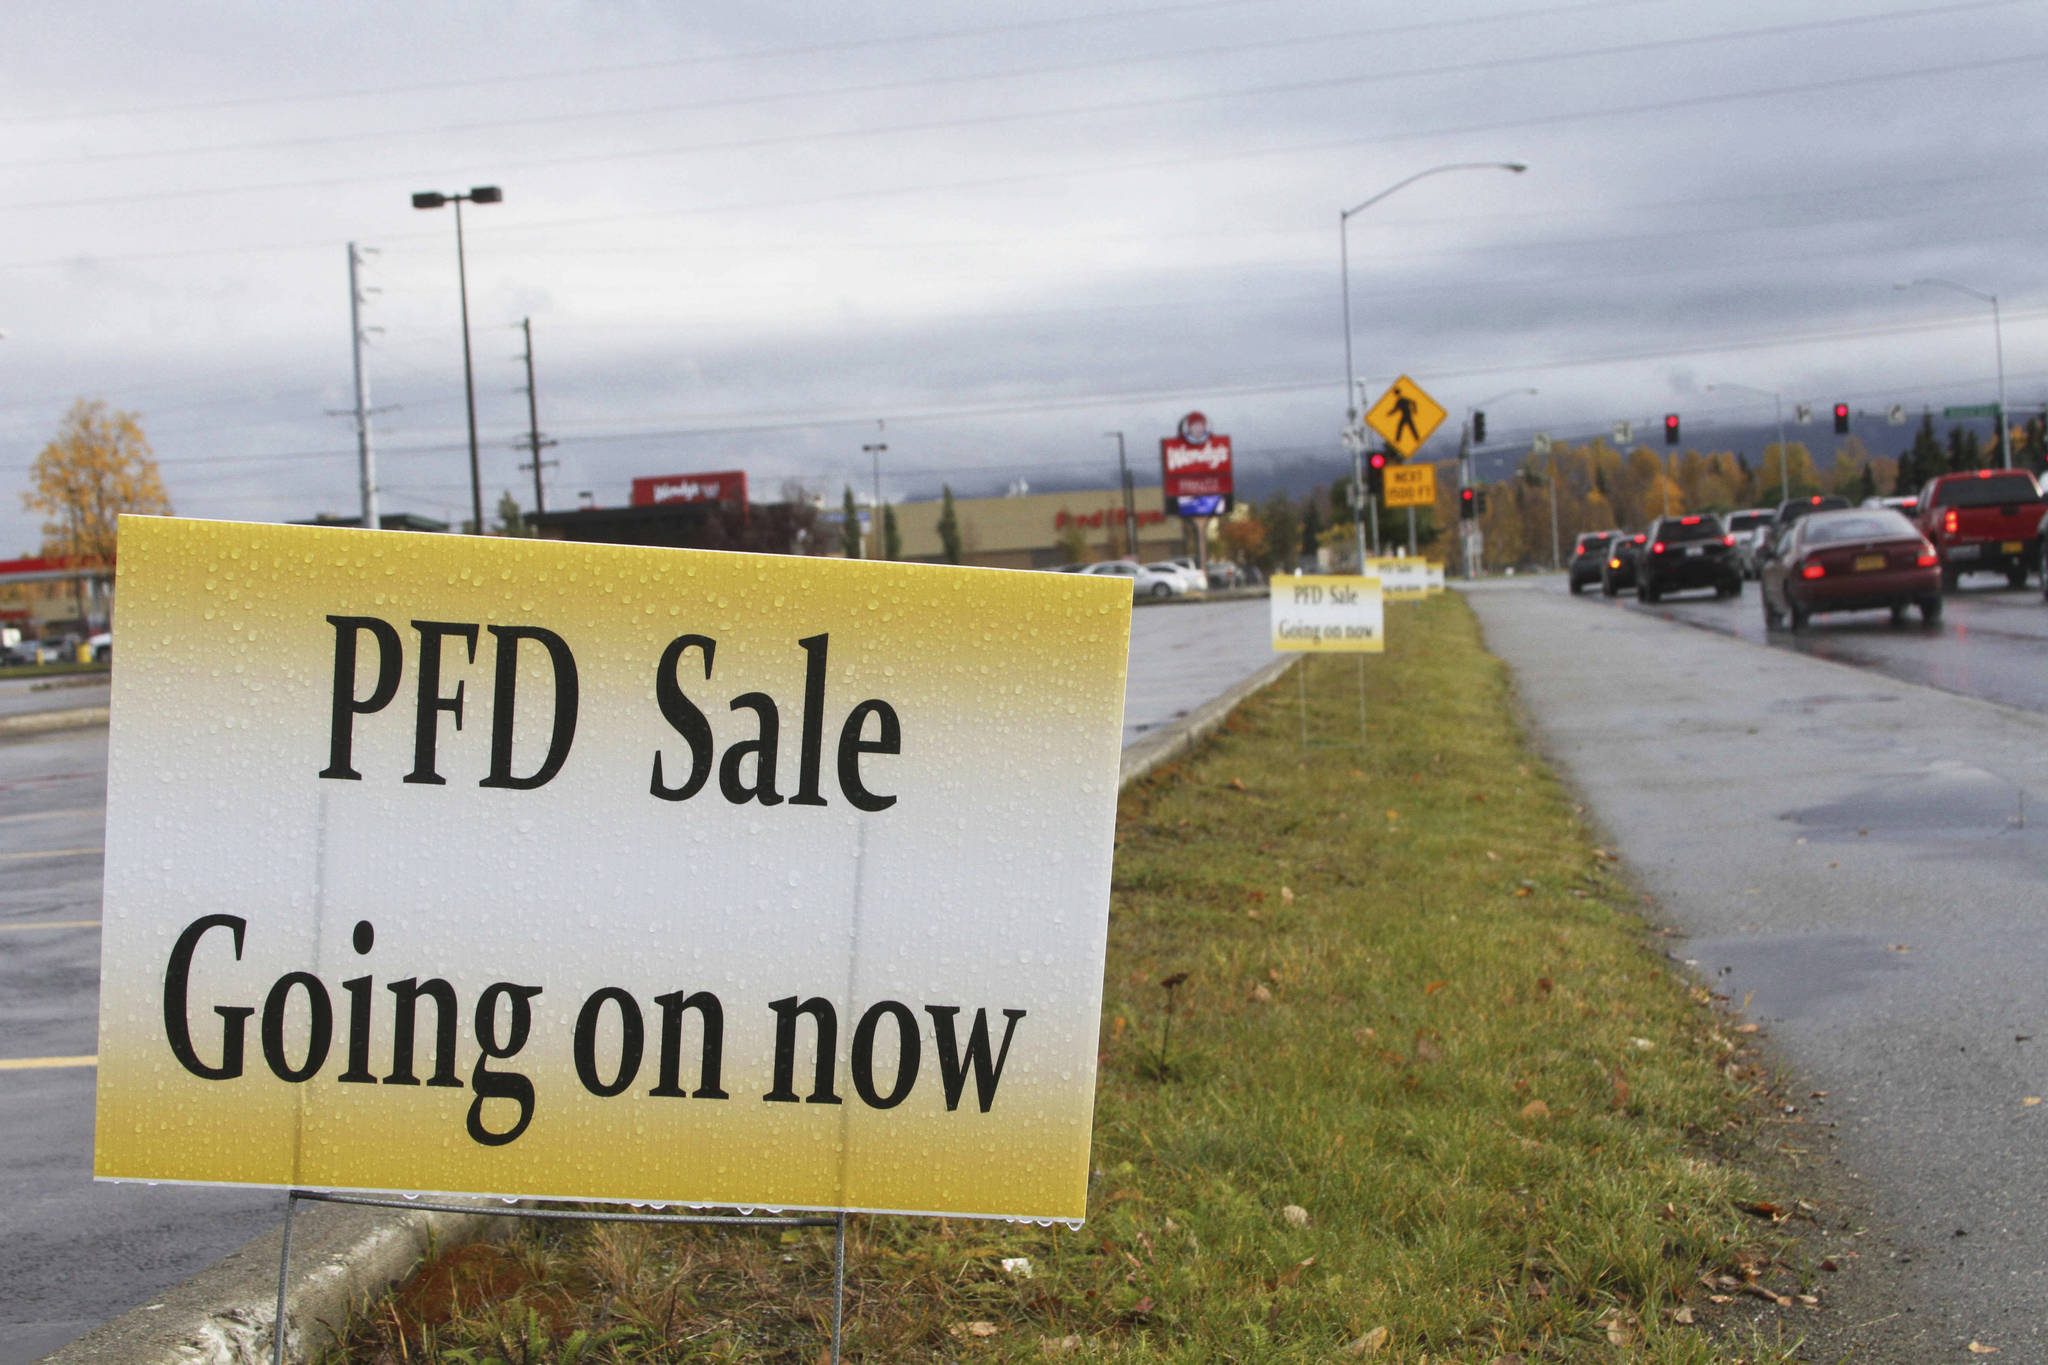 In this Oct. 4, 2017 file photo, a sign meant to entice recipients of payouts from the state’s Permanent Fund Dividend Division, also known as PFD, advertises a sale in Anchorage, Alaska. The Alaska Department of Revenue shut down online applications for Alaska Permanent Fund dividends because of security concerns. The department in an announcement Tuesday, Jan. 1, 2019, said some applicants had inadvertently seen personal information belonging to other applicants who had filed previously. (AP Photo/Mark Thiessen, File)